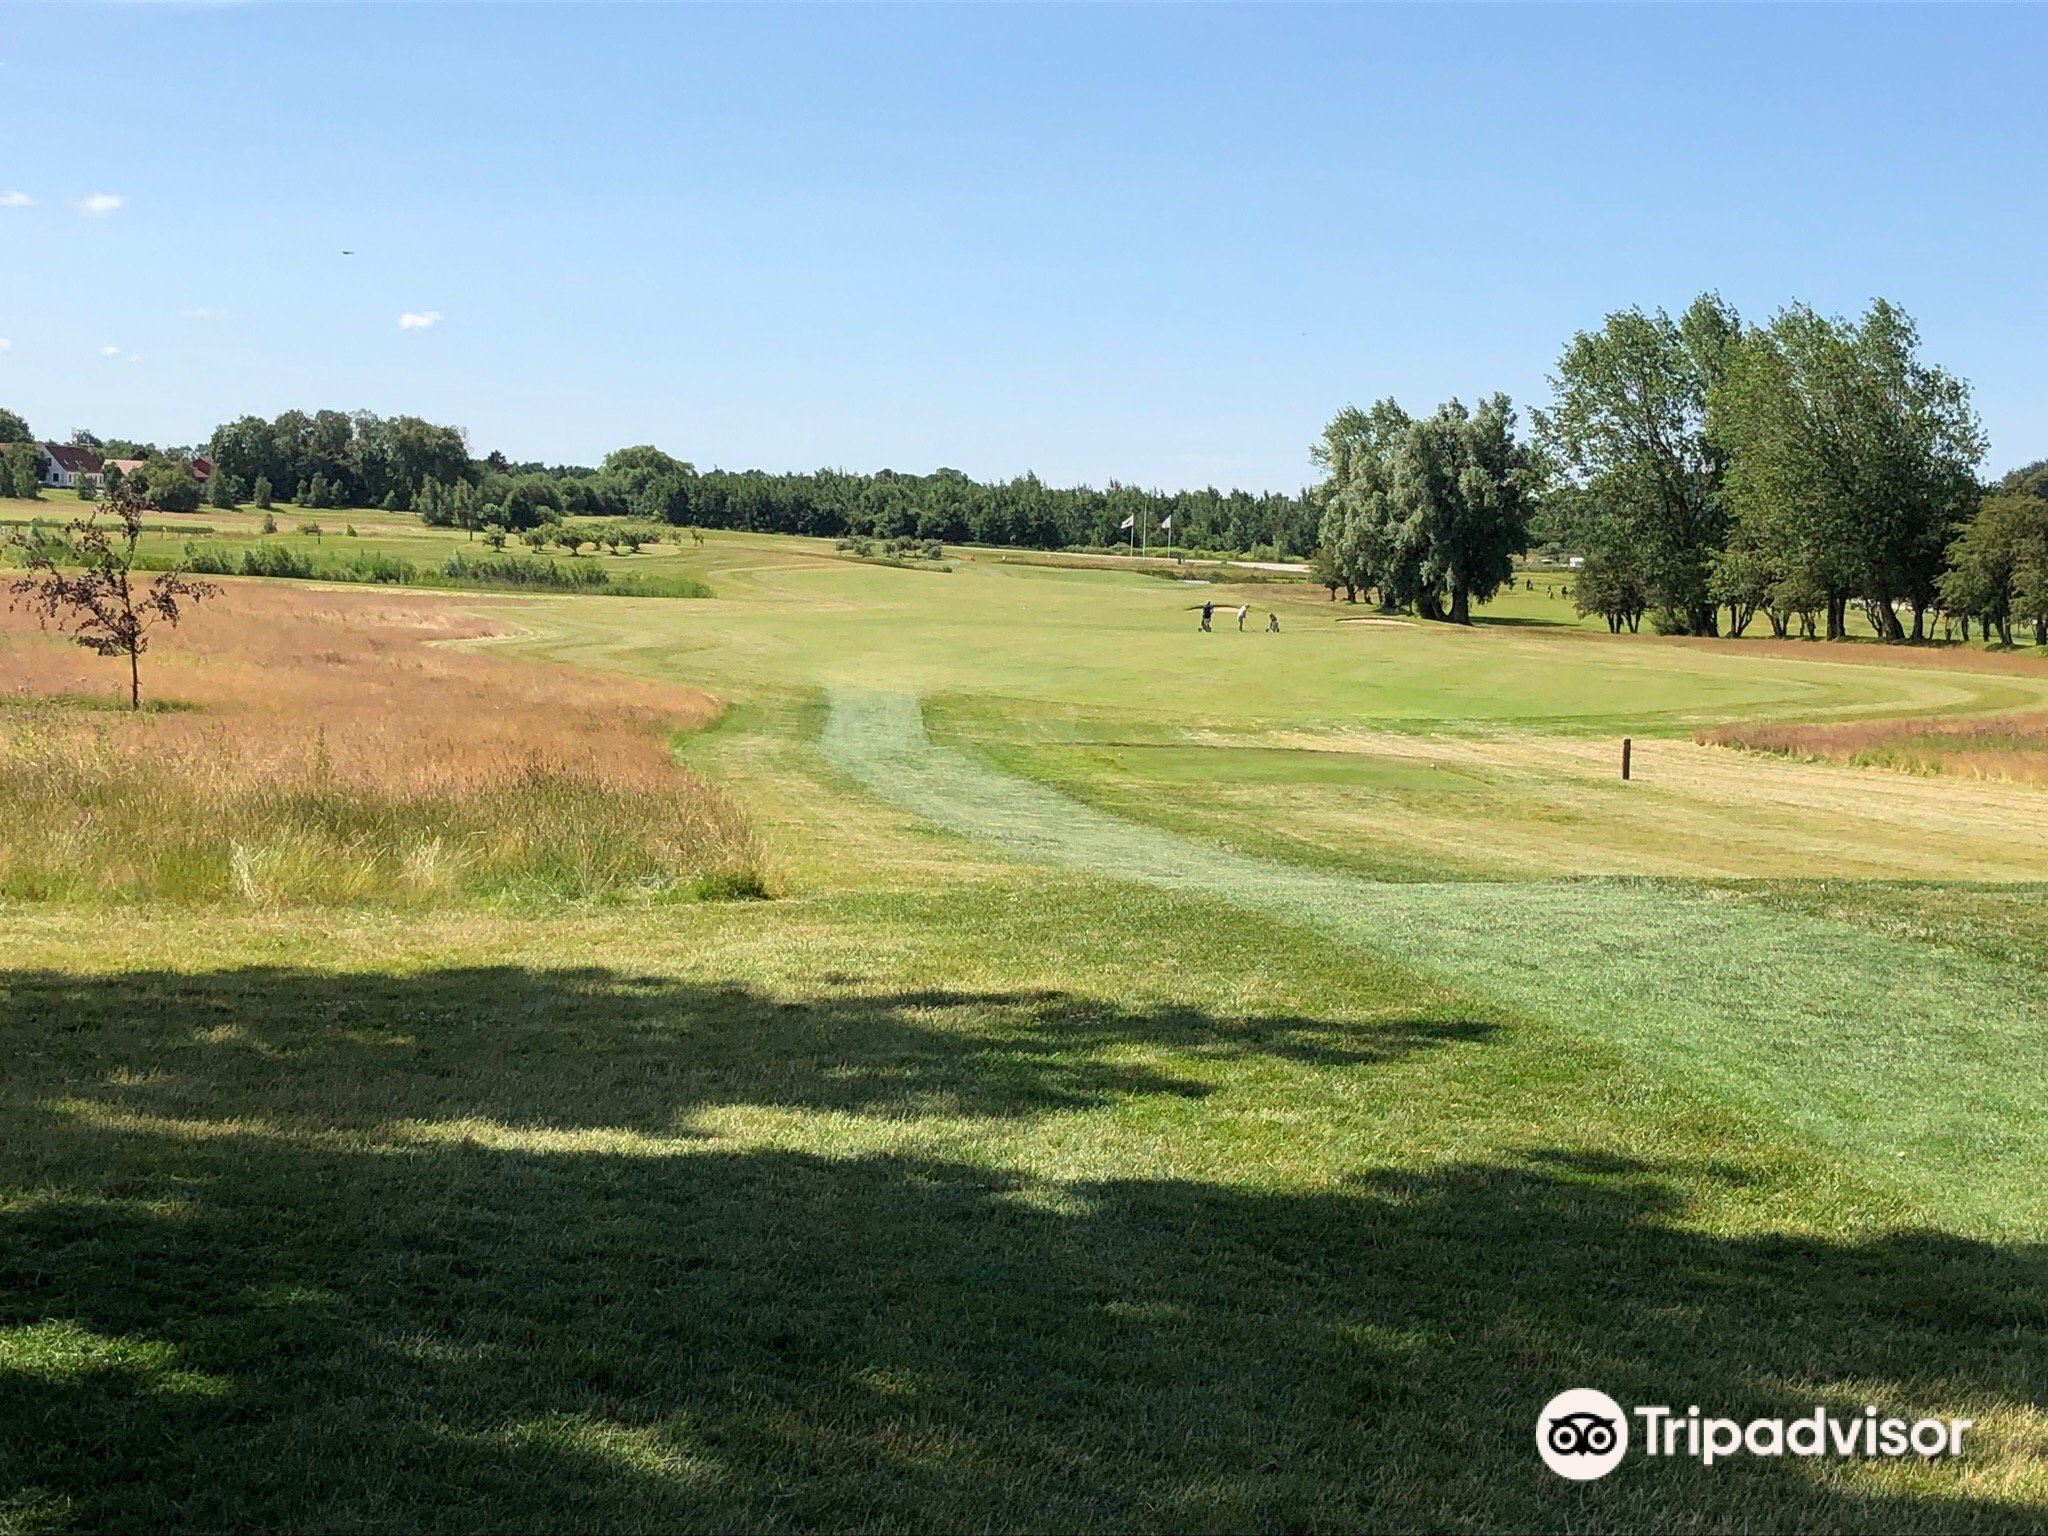 Latest travel itineraries for Greve Golfklub in June in 2023), Greve Golfklub reviews, Greve Golfklub address and opening hours, popular attractions, hotels, and restaurants near Greve Golfklub - Trip.com